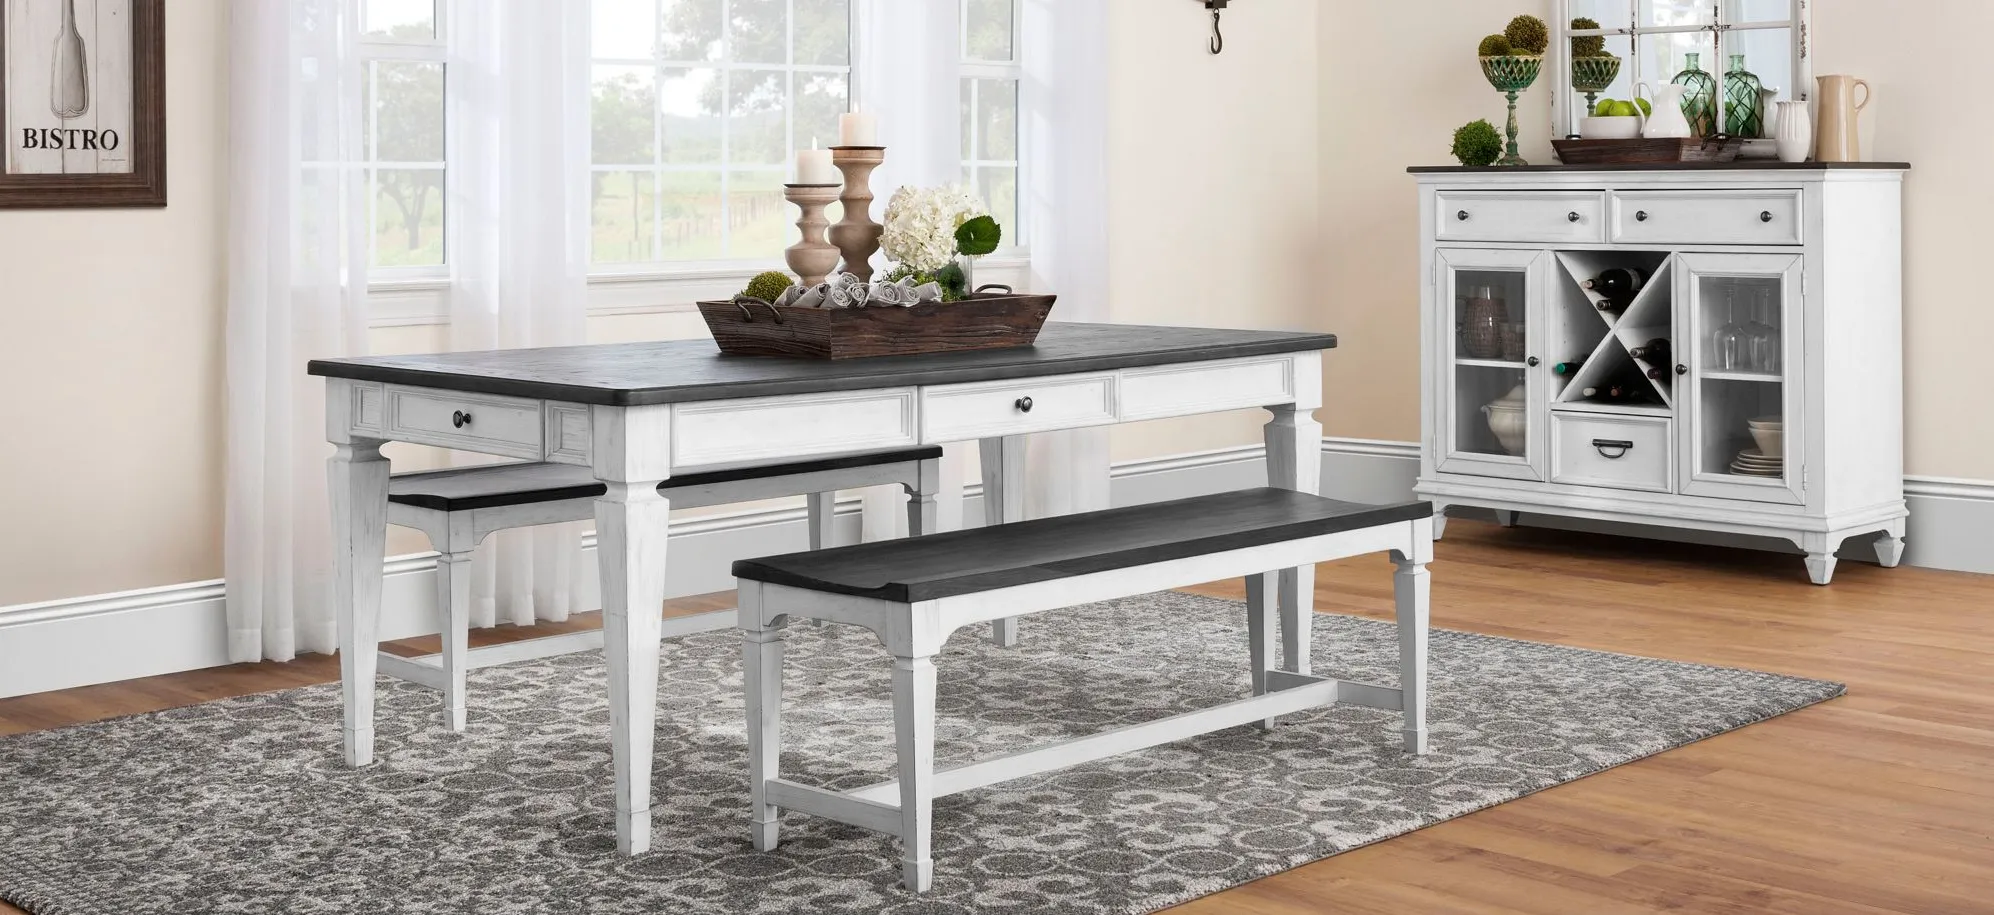 Shelby 3-pc. Dining Set w/Benches in White / Gray by Liberty Furniture